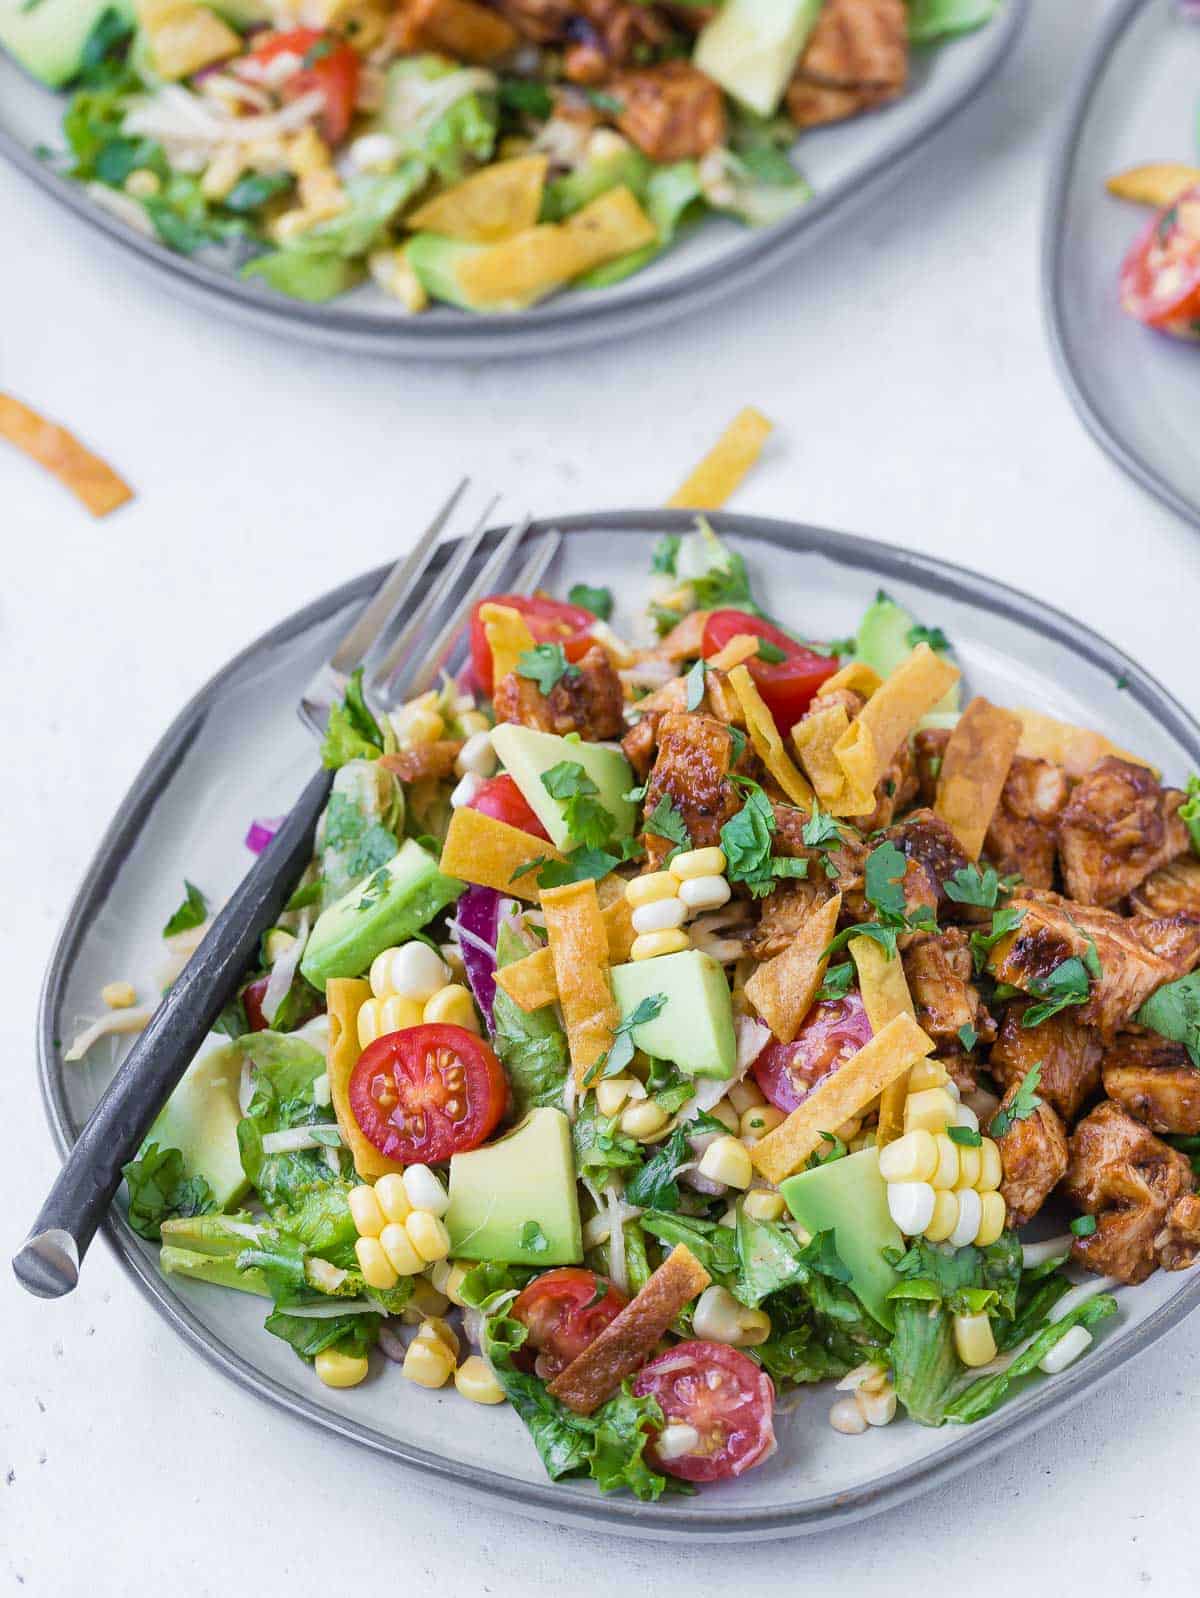 Colorful chopped salad on a grey plate. Salad includes bbq grilled chicken, lettuce, onion, tomato, crispy tortilla strips, avocado, corn and more! Whole ingredients are featured in the background of the image.